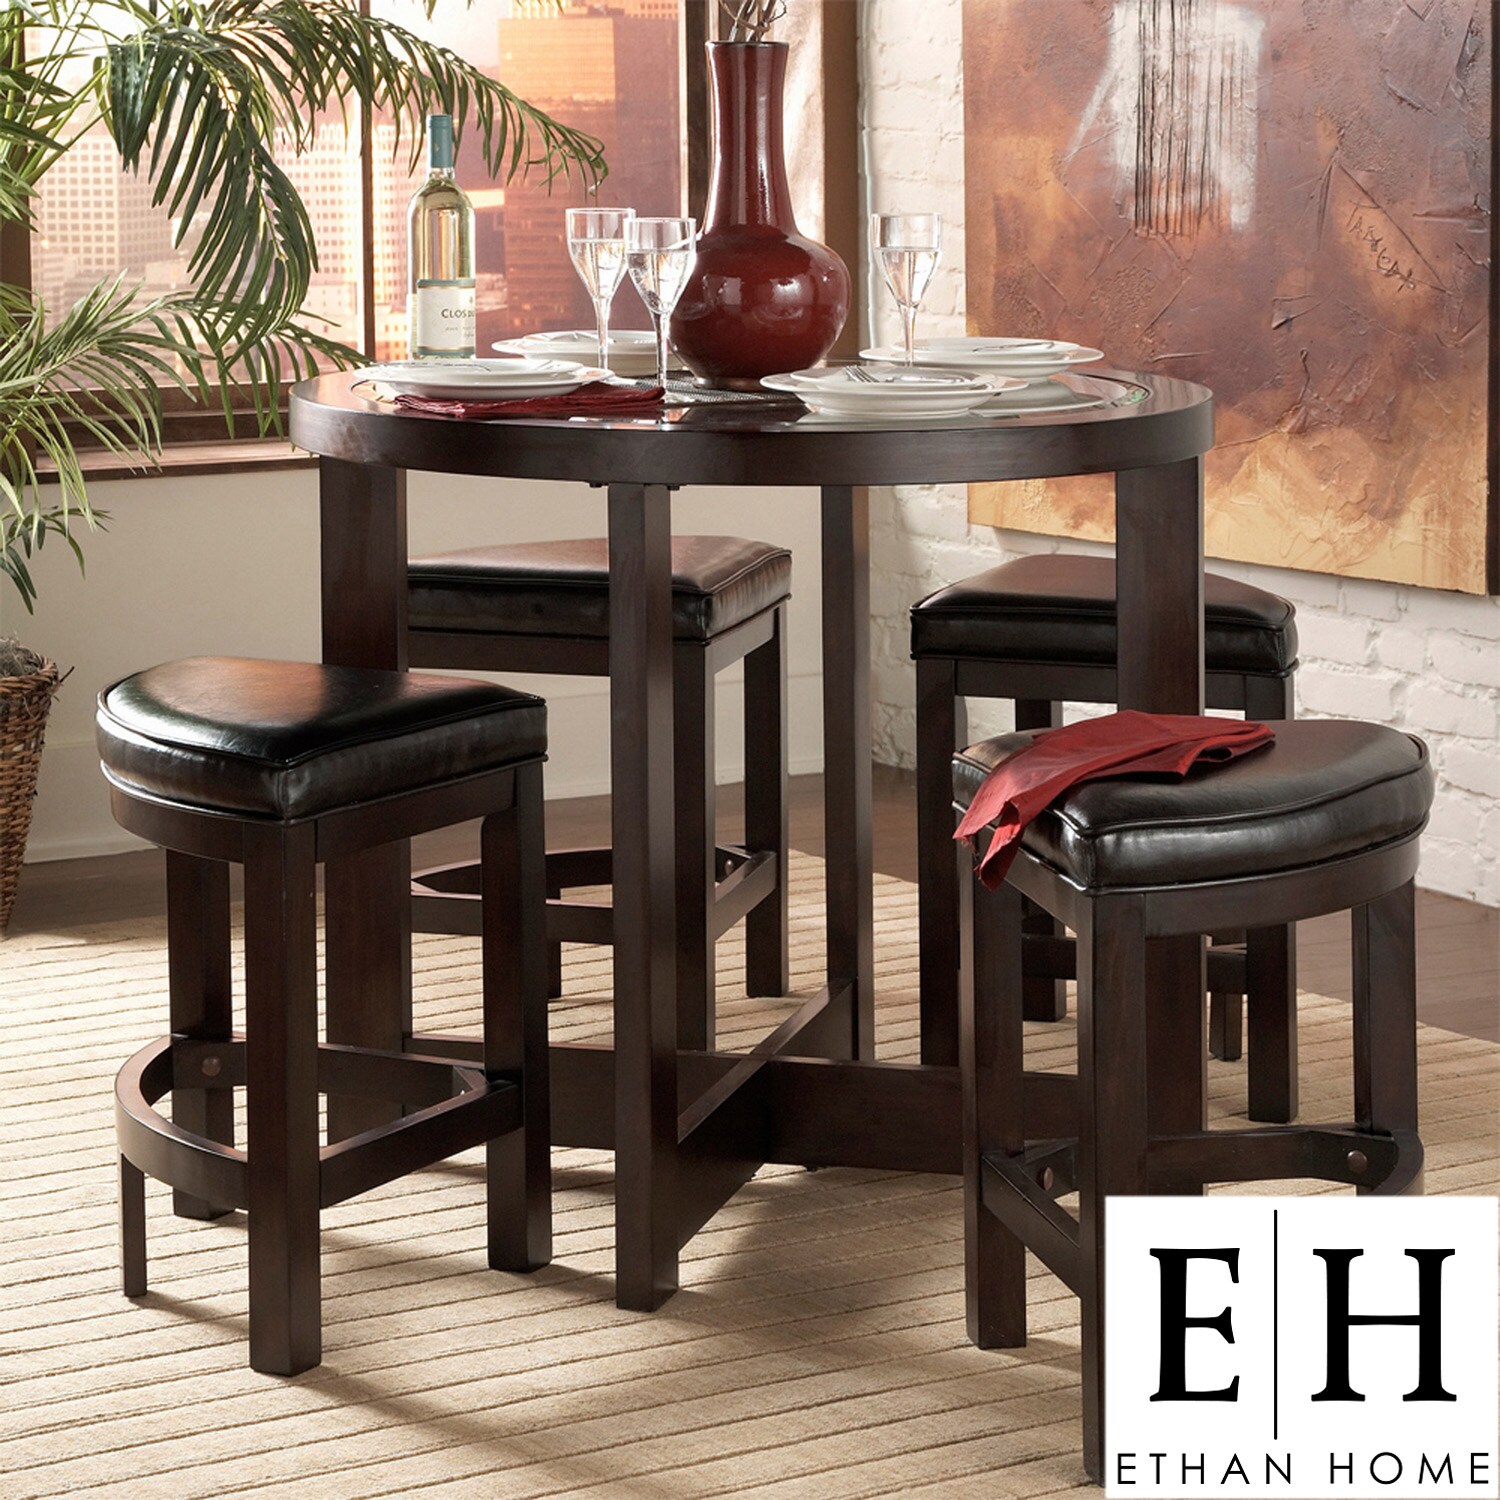 ETHAN HOME Capria Brown 5 piece Counter Height Pub Dining Set Today $